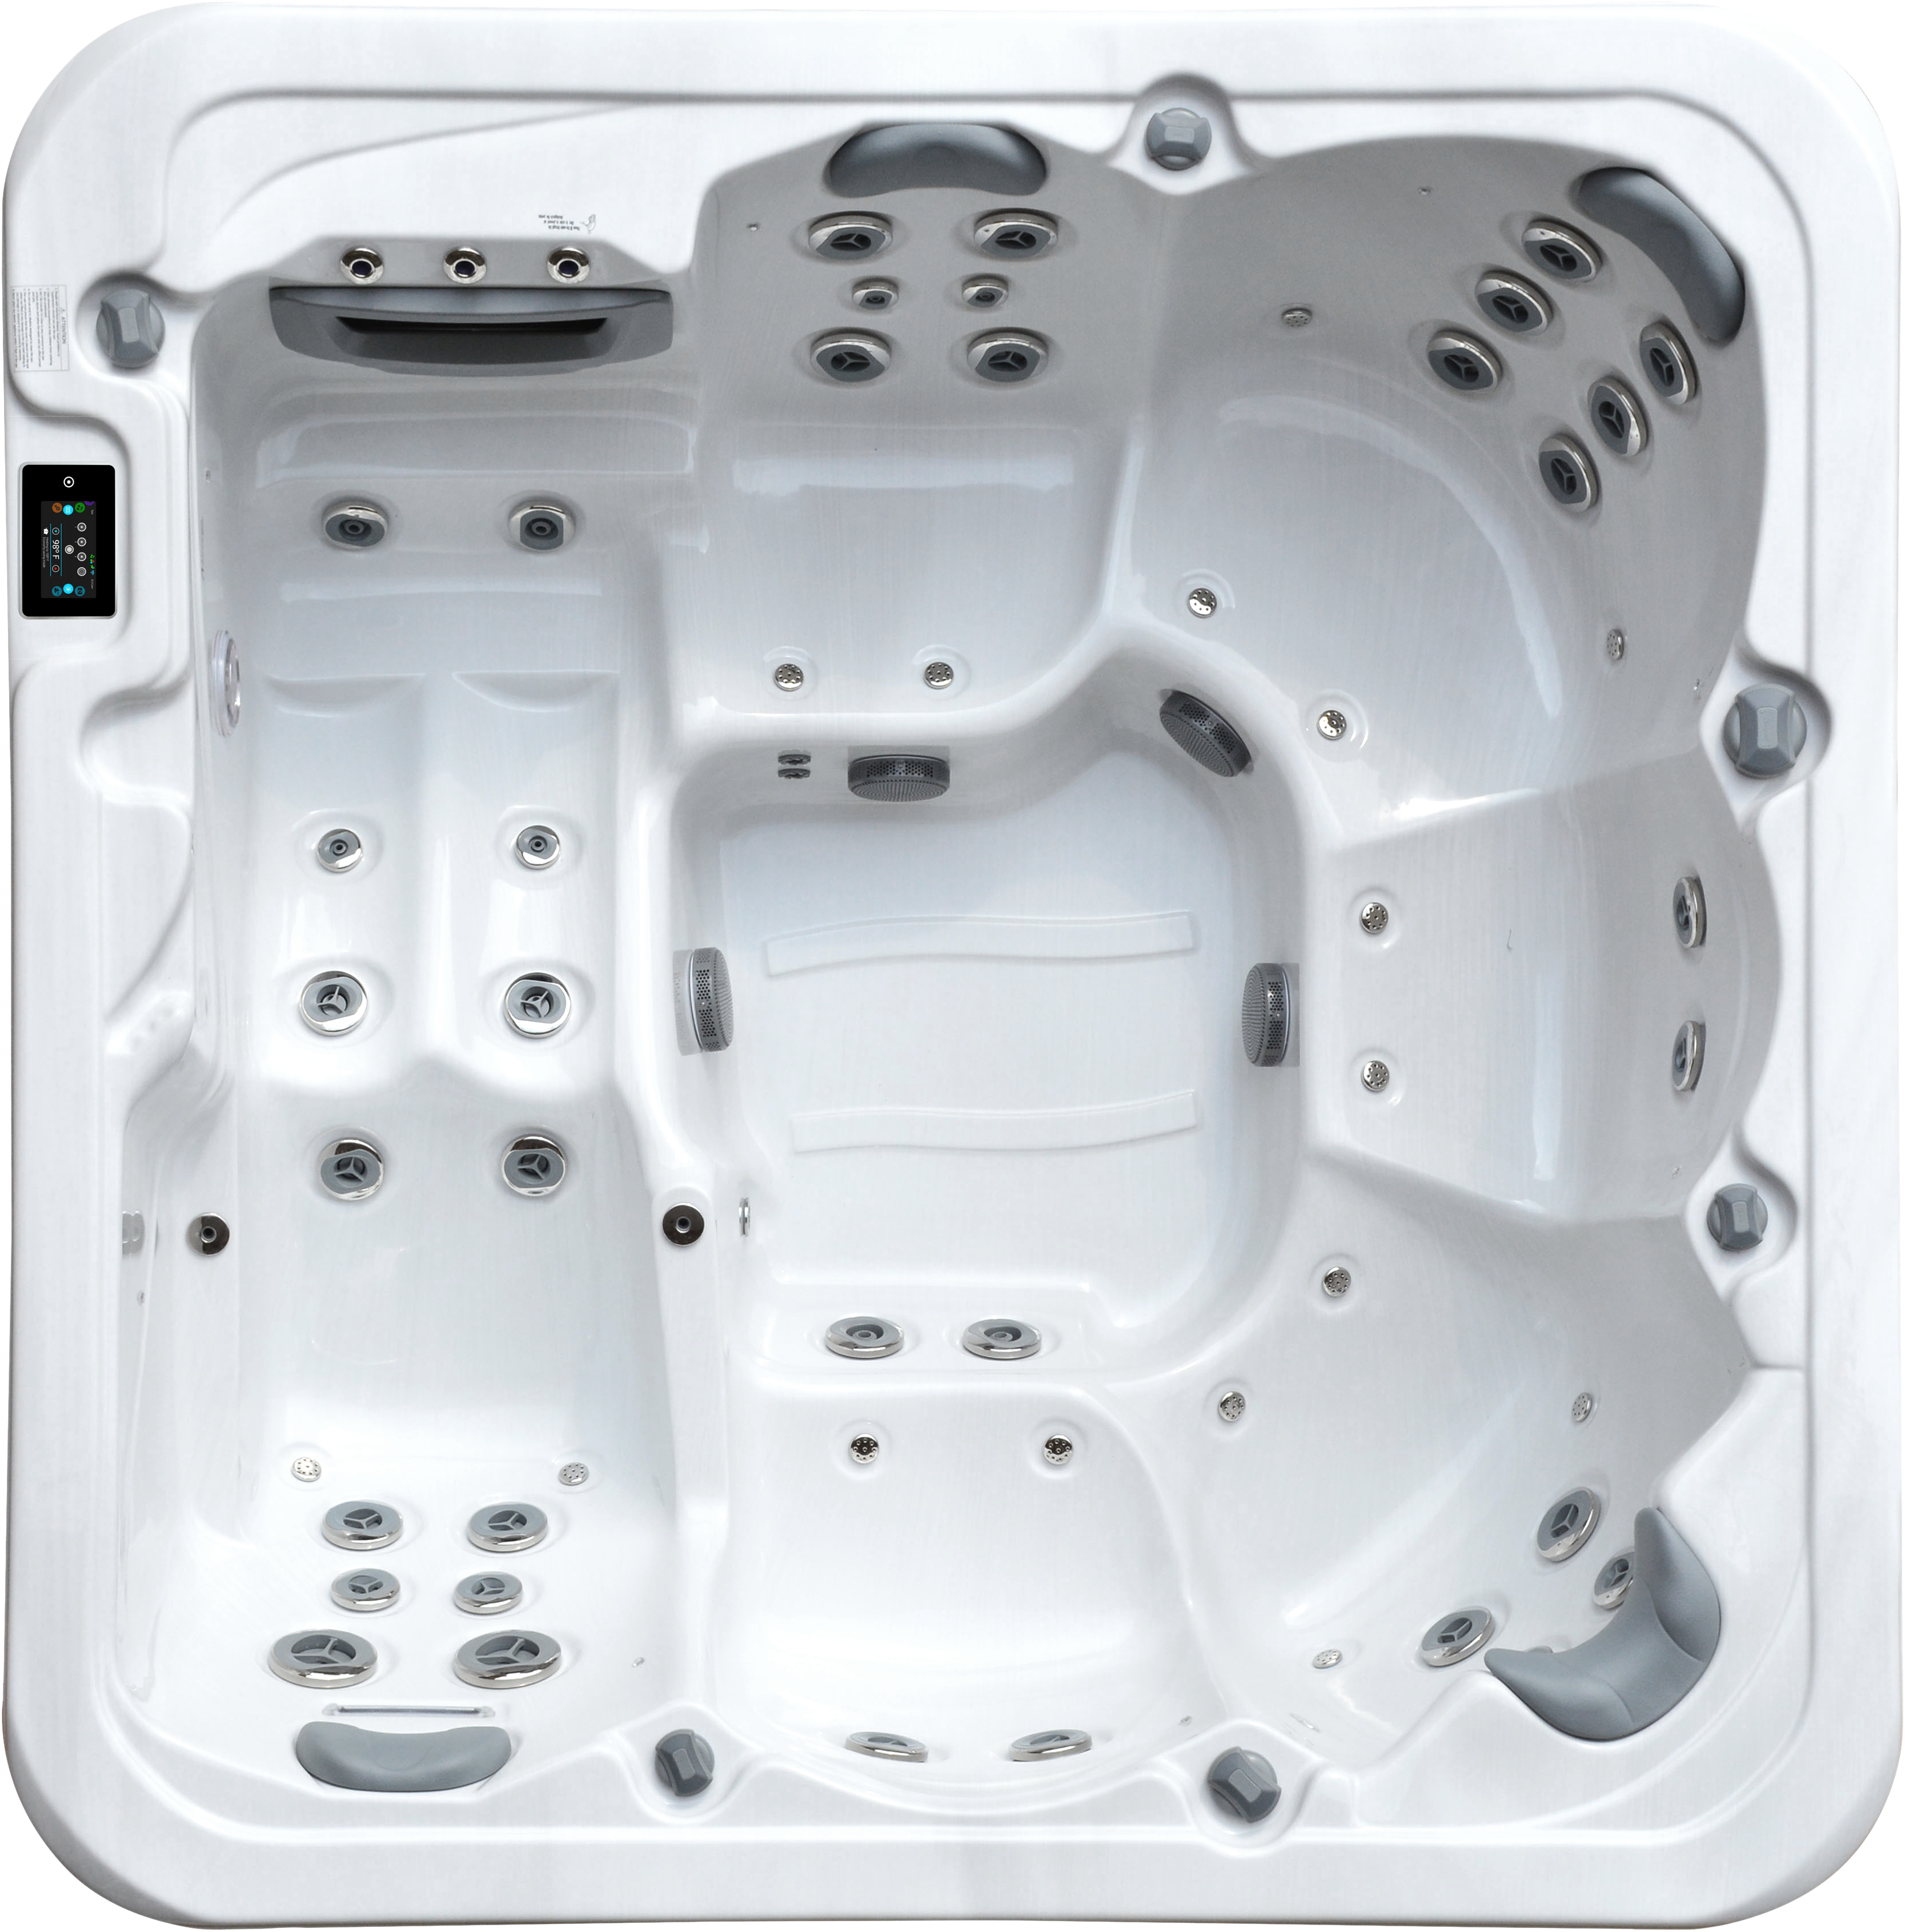 oasis rx-562 hot tub available at hot tub liverpool 